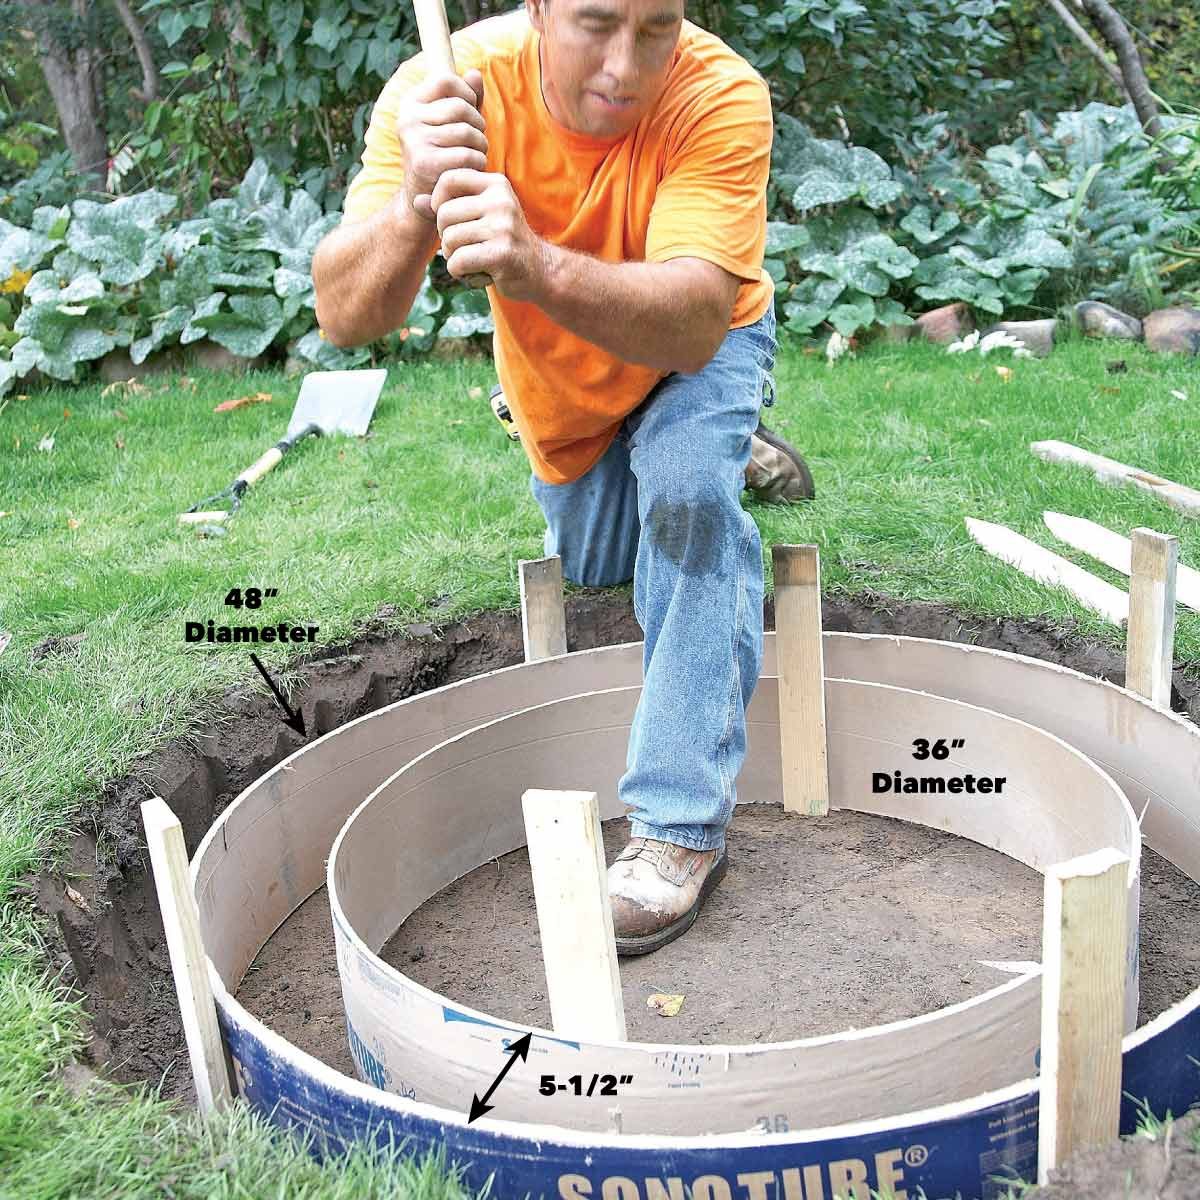 How To Build A Diy Fire Pit | Family Handyman